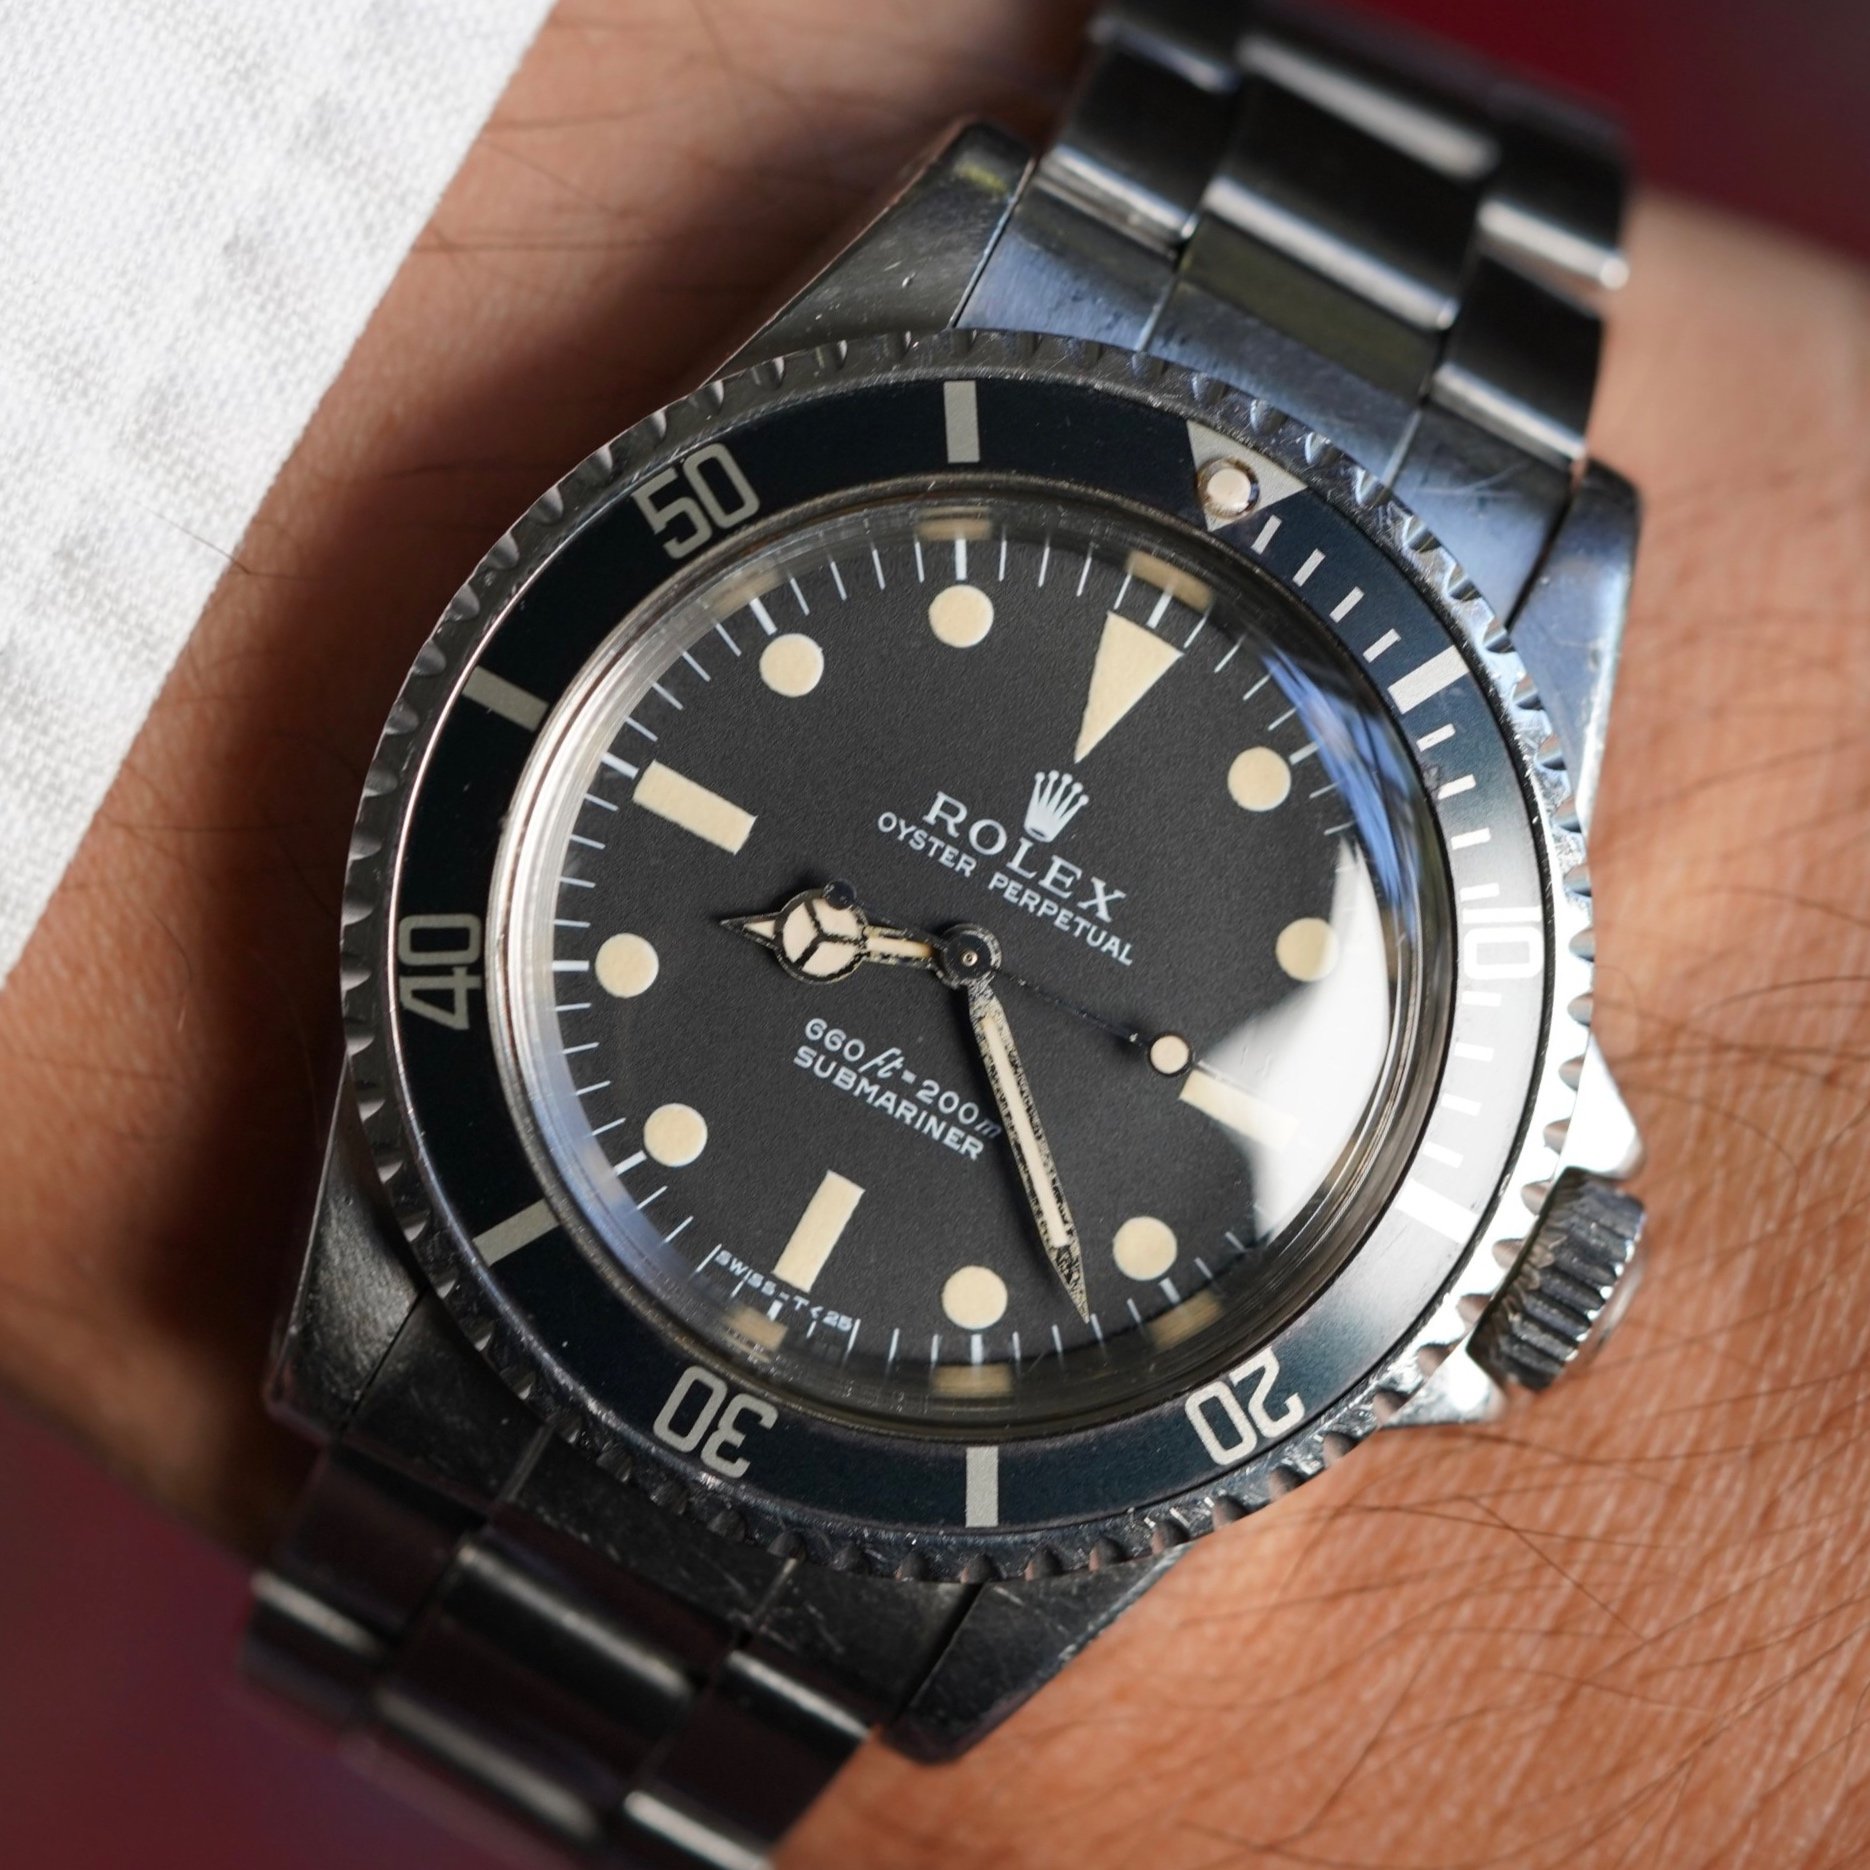 Rolex Submariner Feet First Reference 5513